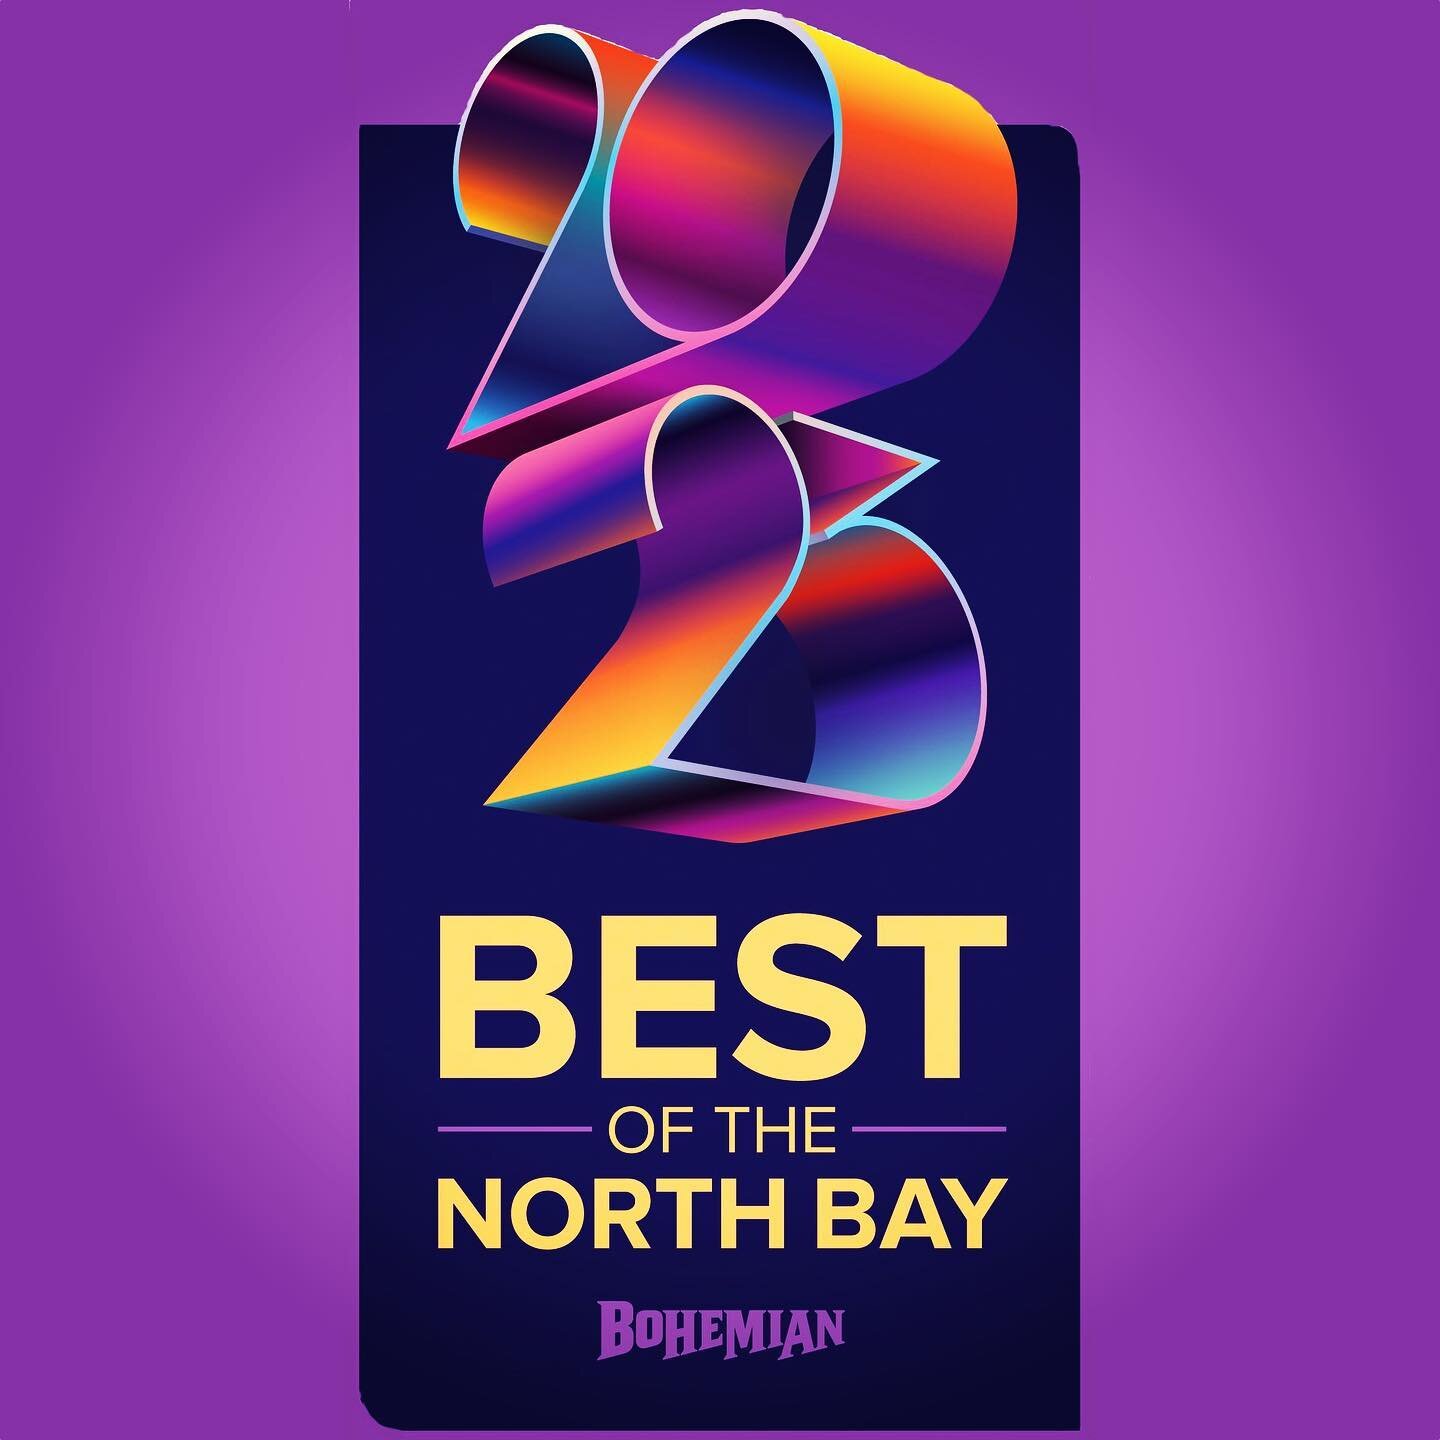 Thanks to all of you for your support! We are pleased to announce we are this year&rsquo;s winner for the Bohemian&rsquo;s Best of the North Bay Award for the Best Architect in Sonoma County.
#larslangbergarchitects #larsarchitects #bestofthebohemian